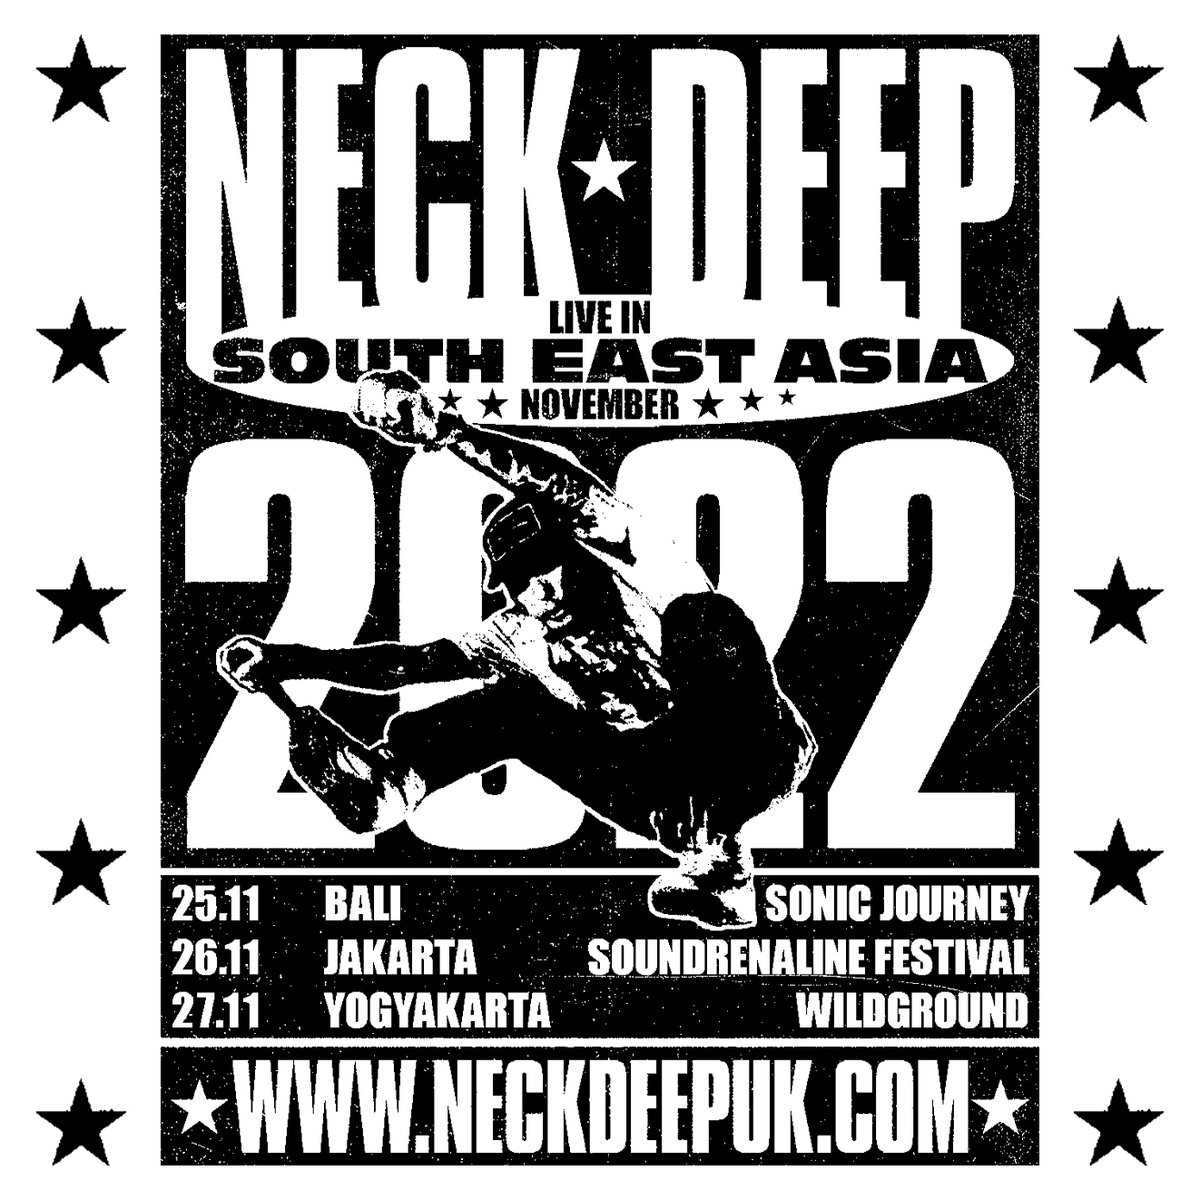 After many years, we’re finally coming back to South East Asia! Your love and support for our band since day 1 has never gone unnoticed and we can’t wait to see all of your beautiful faces again. Tickets on sale now at neckdeepuk.com/live